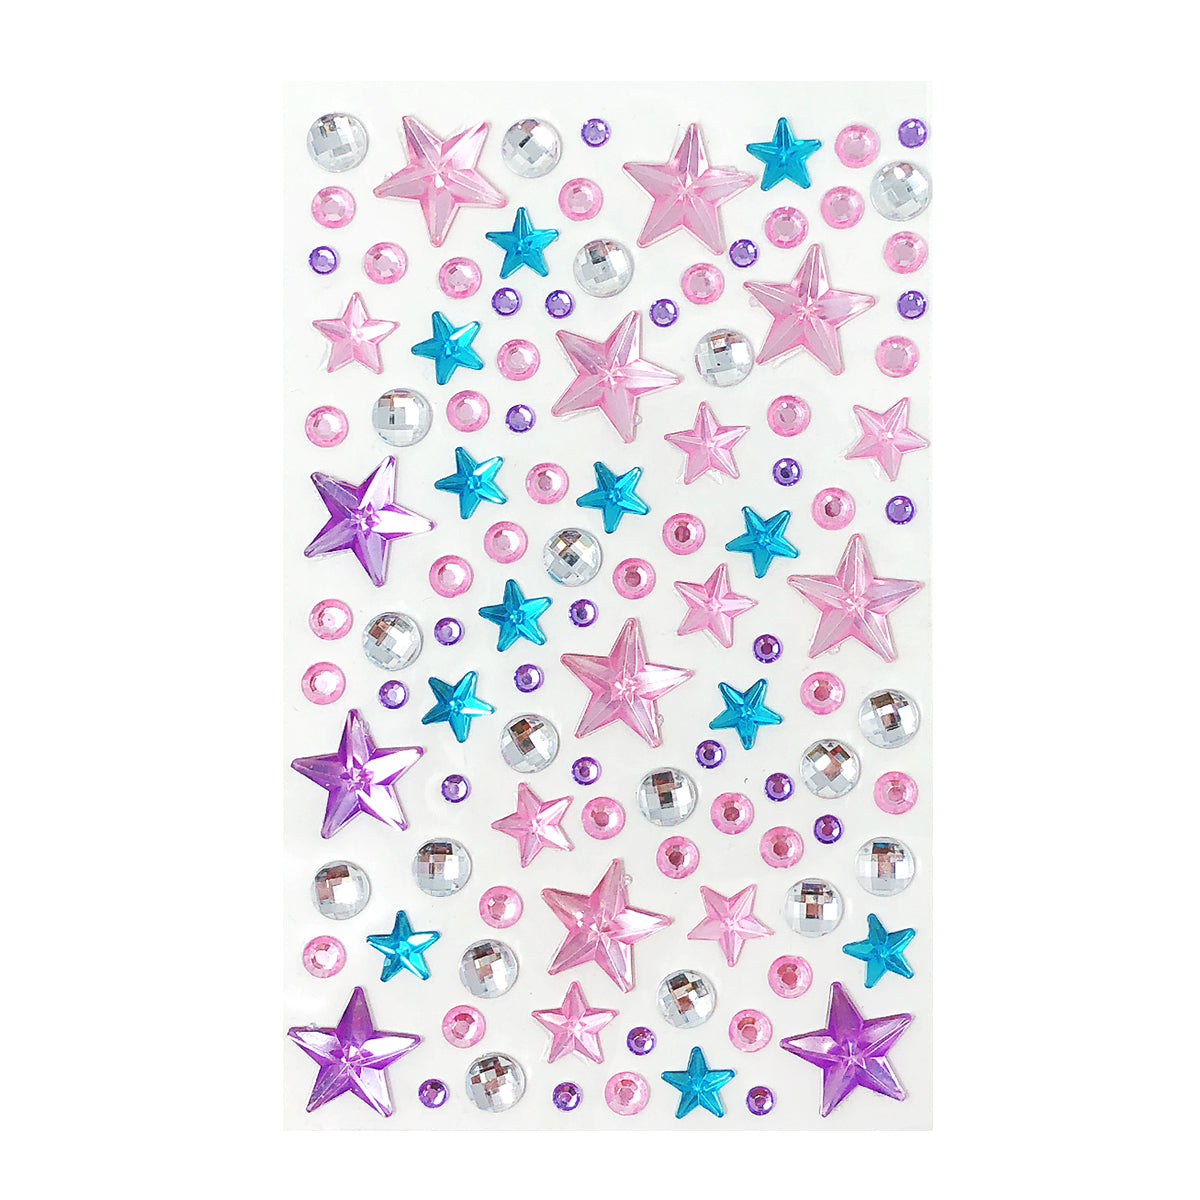 Wrapables 164 pieces Crystal Star and Pearl Stickers Adhesive Rhinestones,  Silver